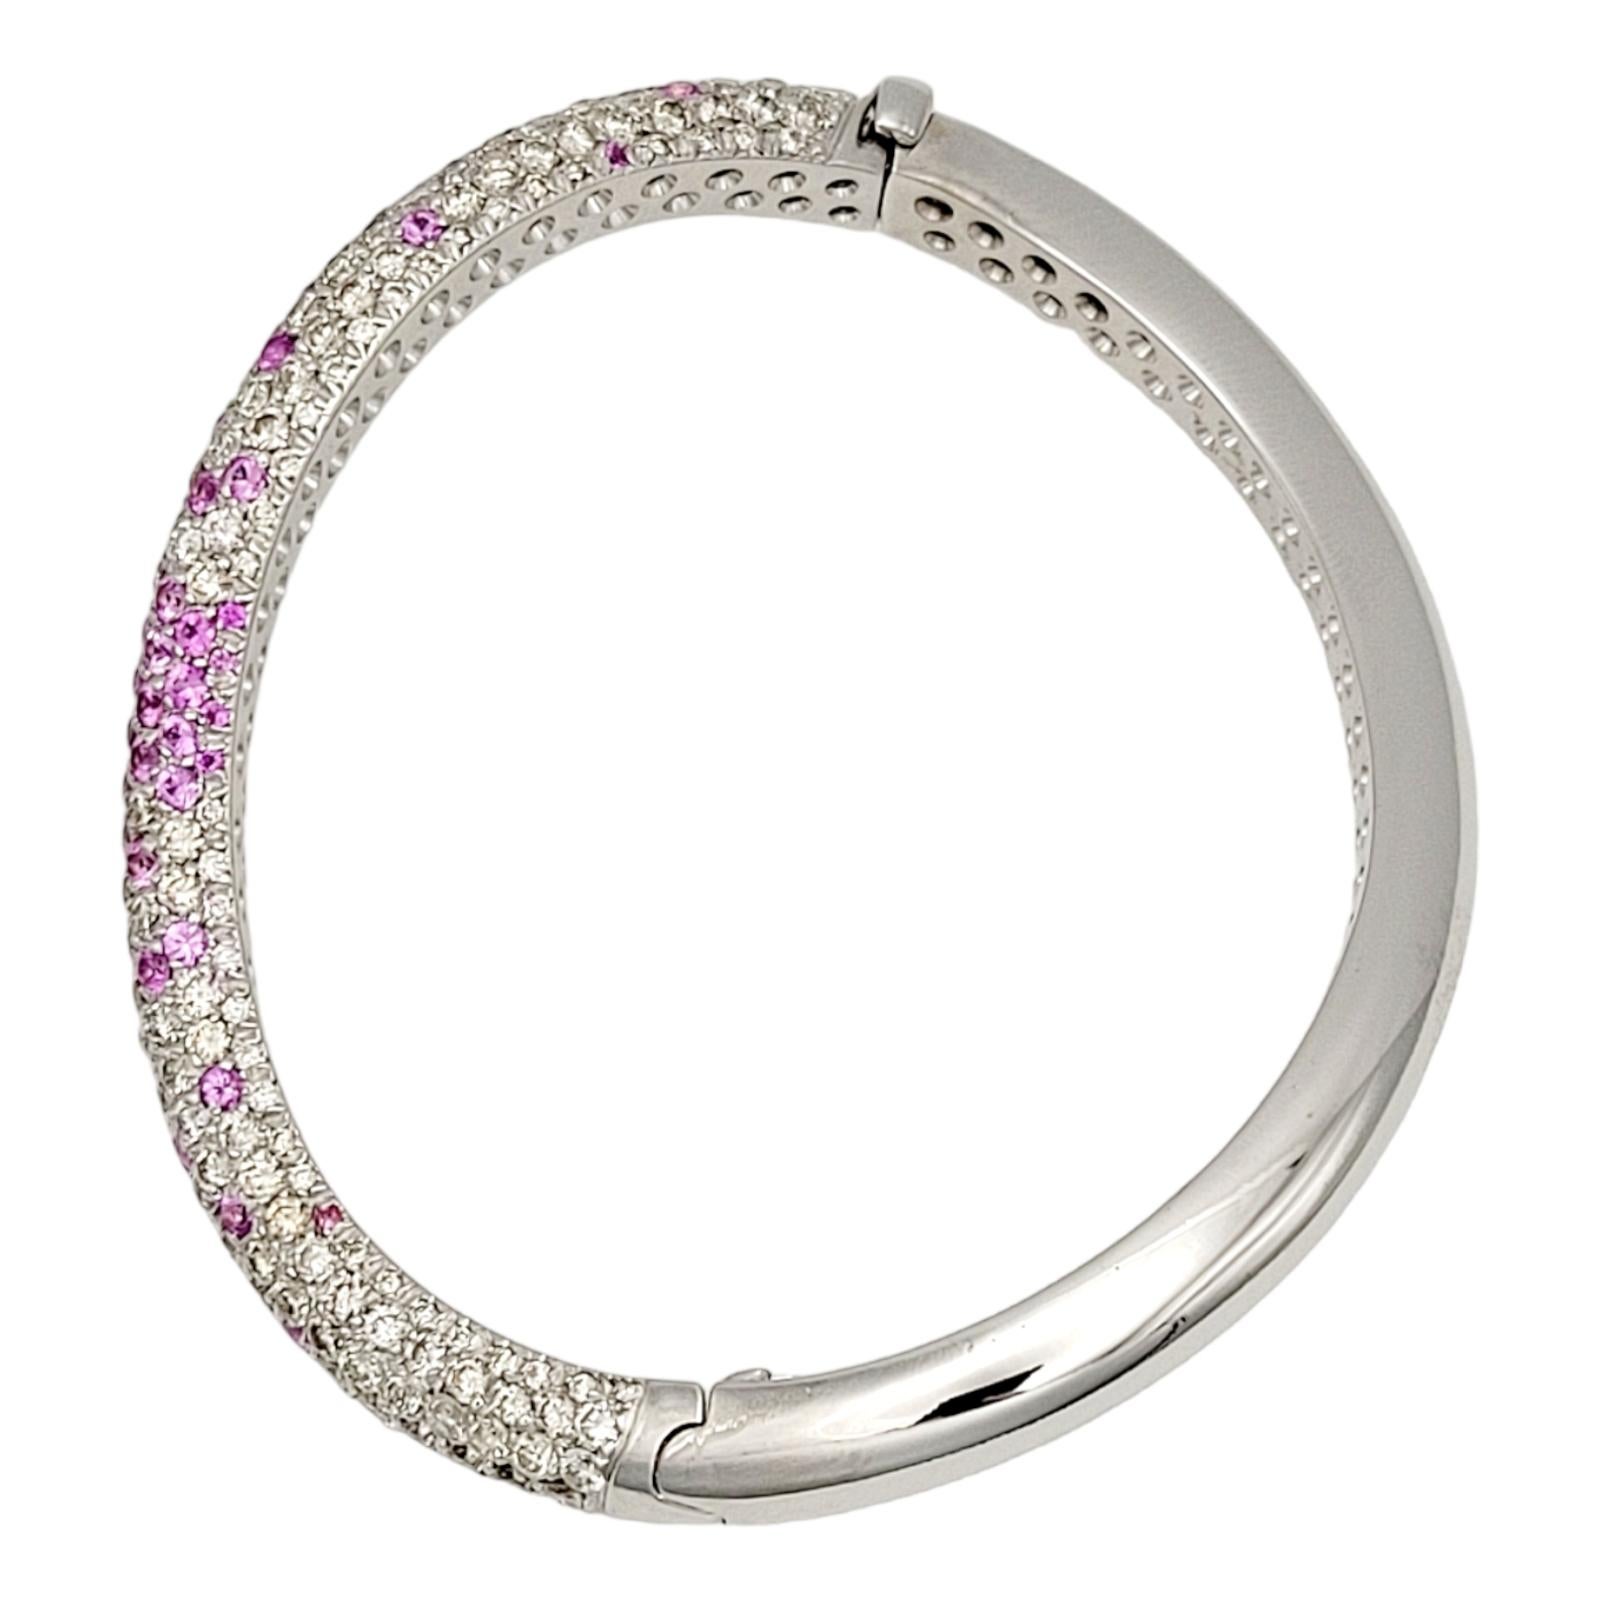 Andreoli Pink Sapphire and Pave Diamond Wave Bangle Bracelet 18 Karat Gold In Good Condition For Sale In Scottsdale, AZ